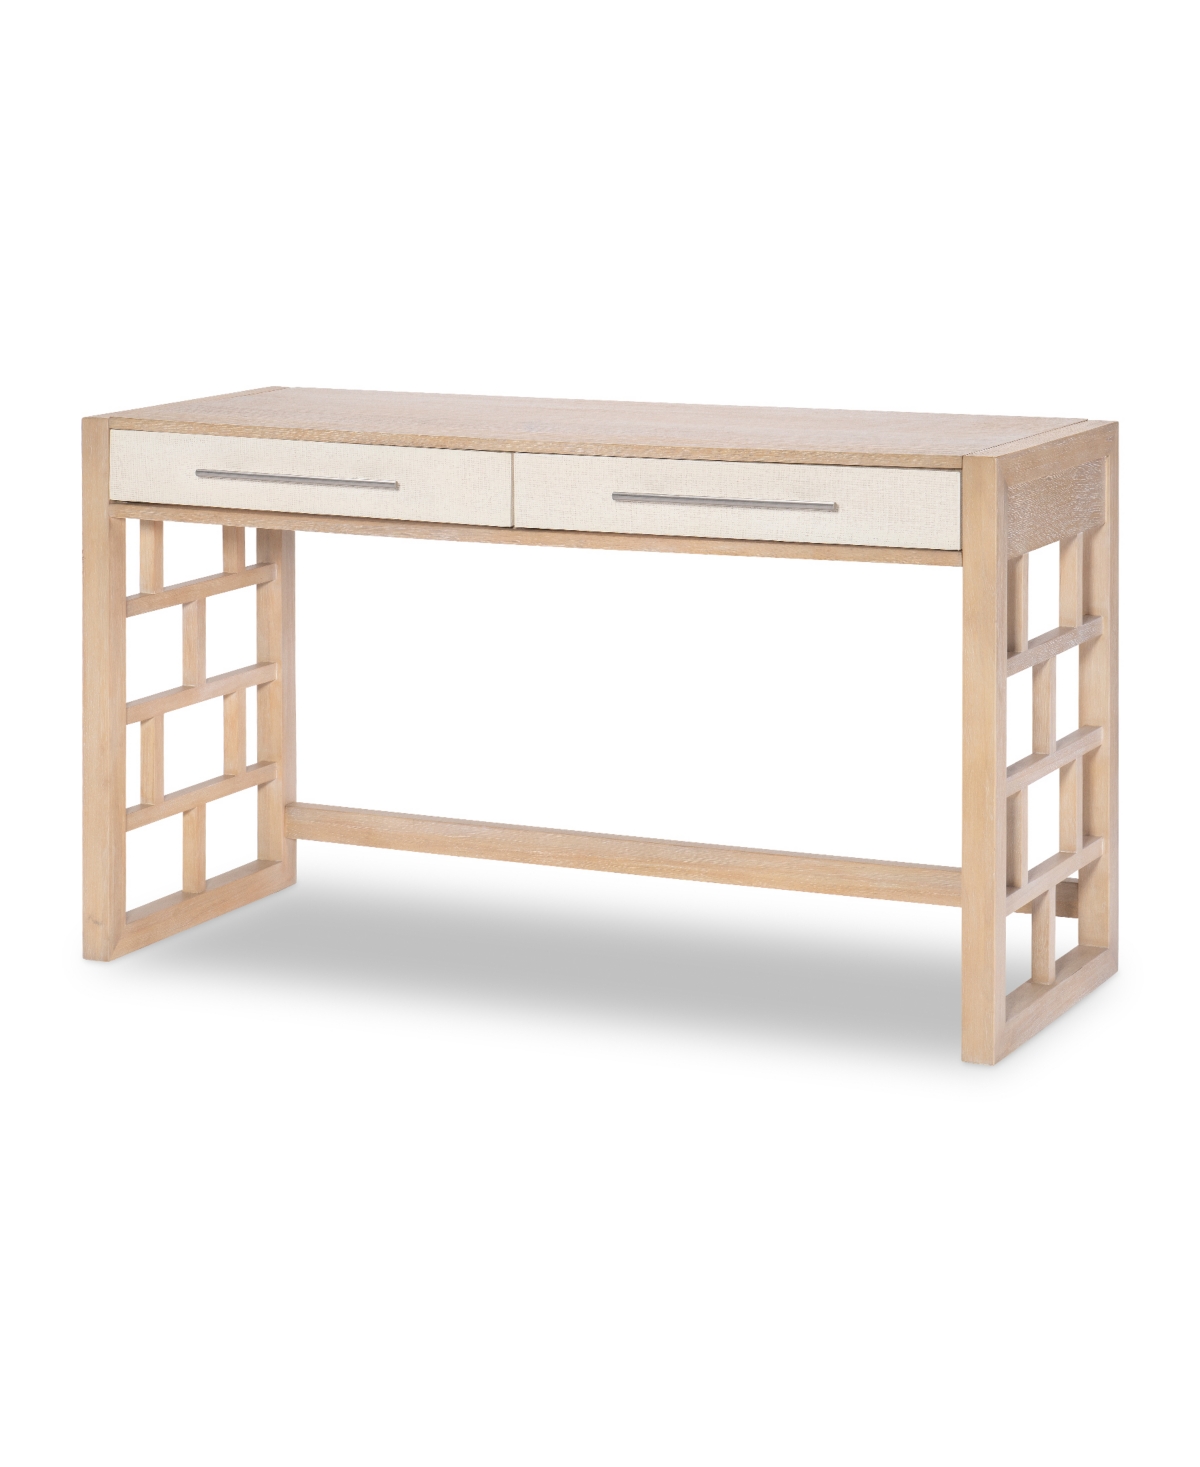 Furniture Biscayne 52" Wood Sofa Table In Malabar With Alabaster Fronts